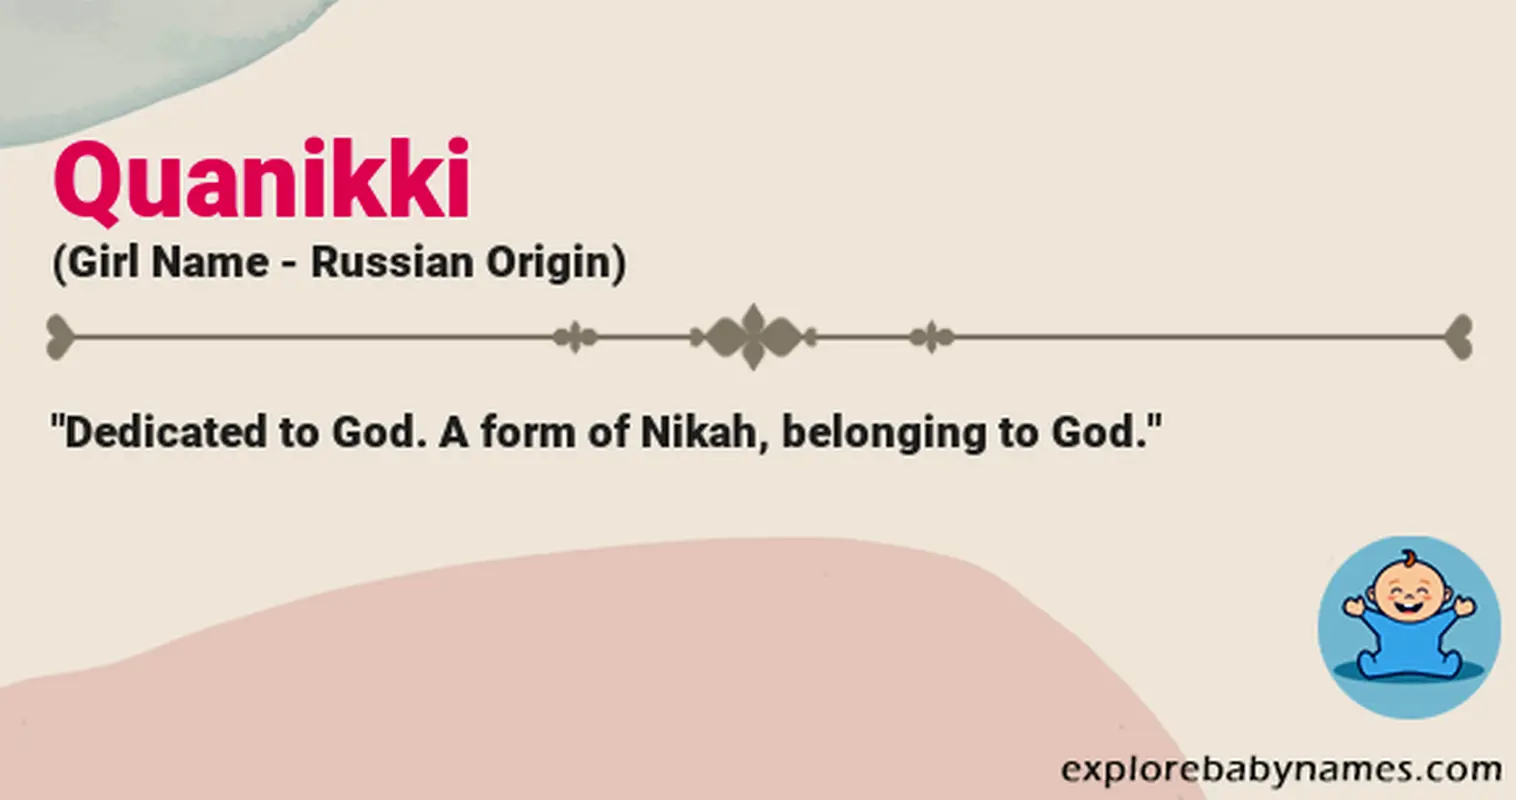 Meaning of Quanikki